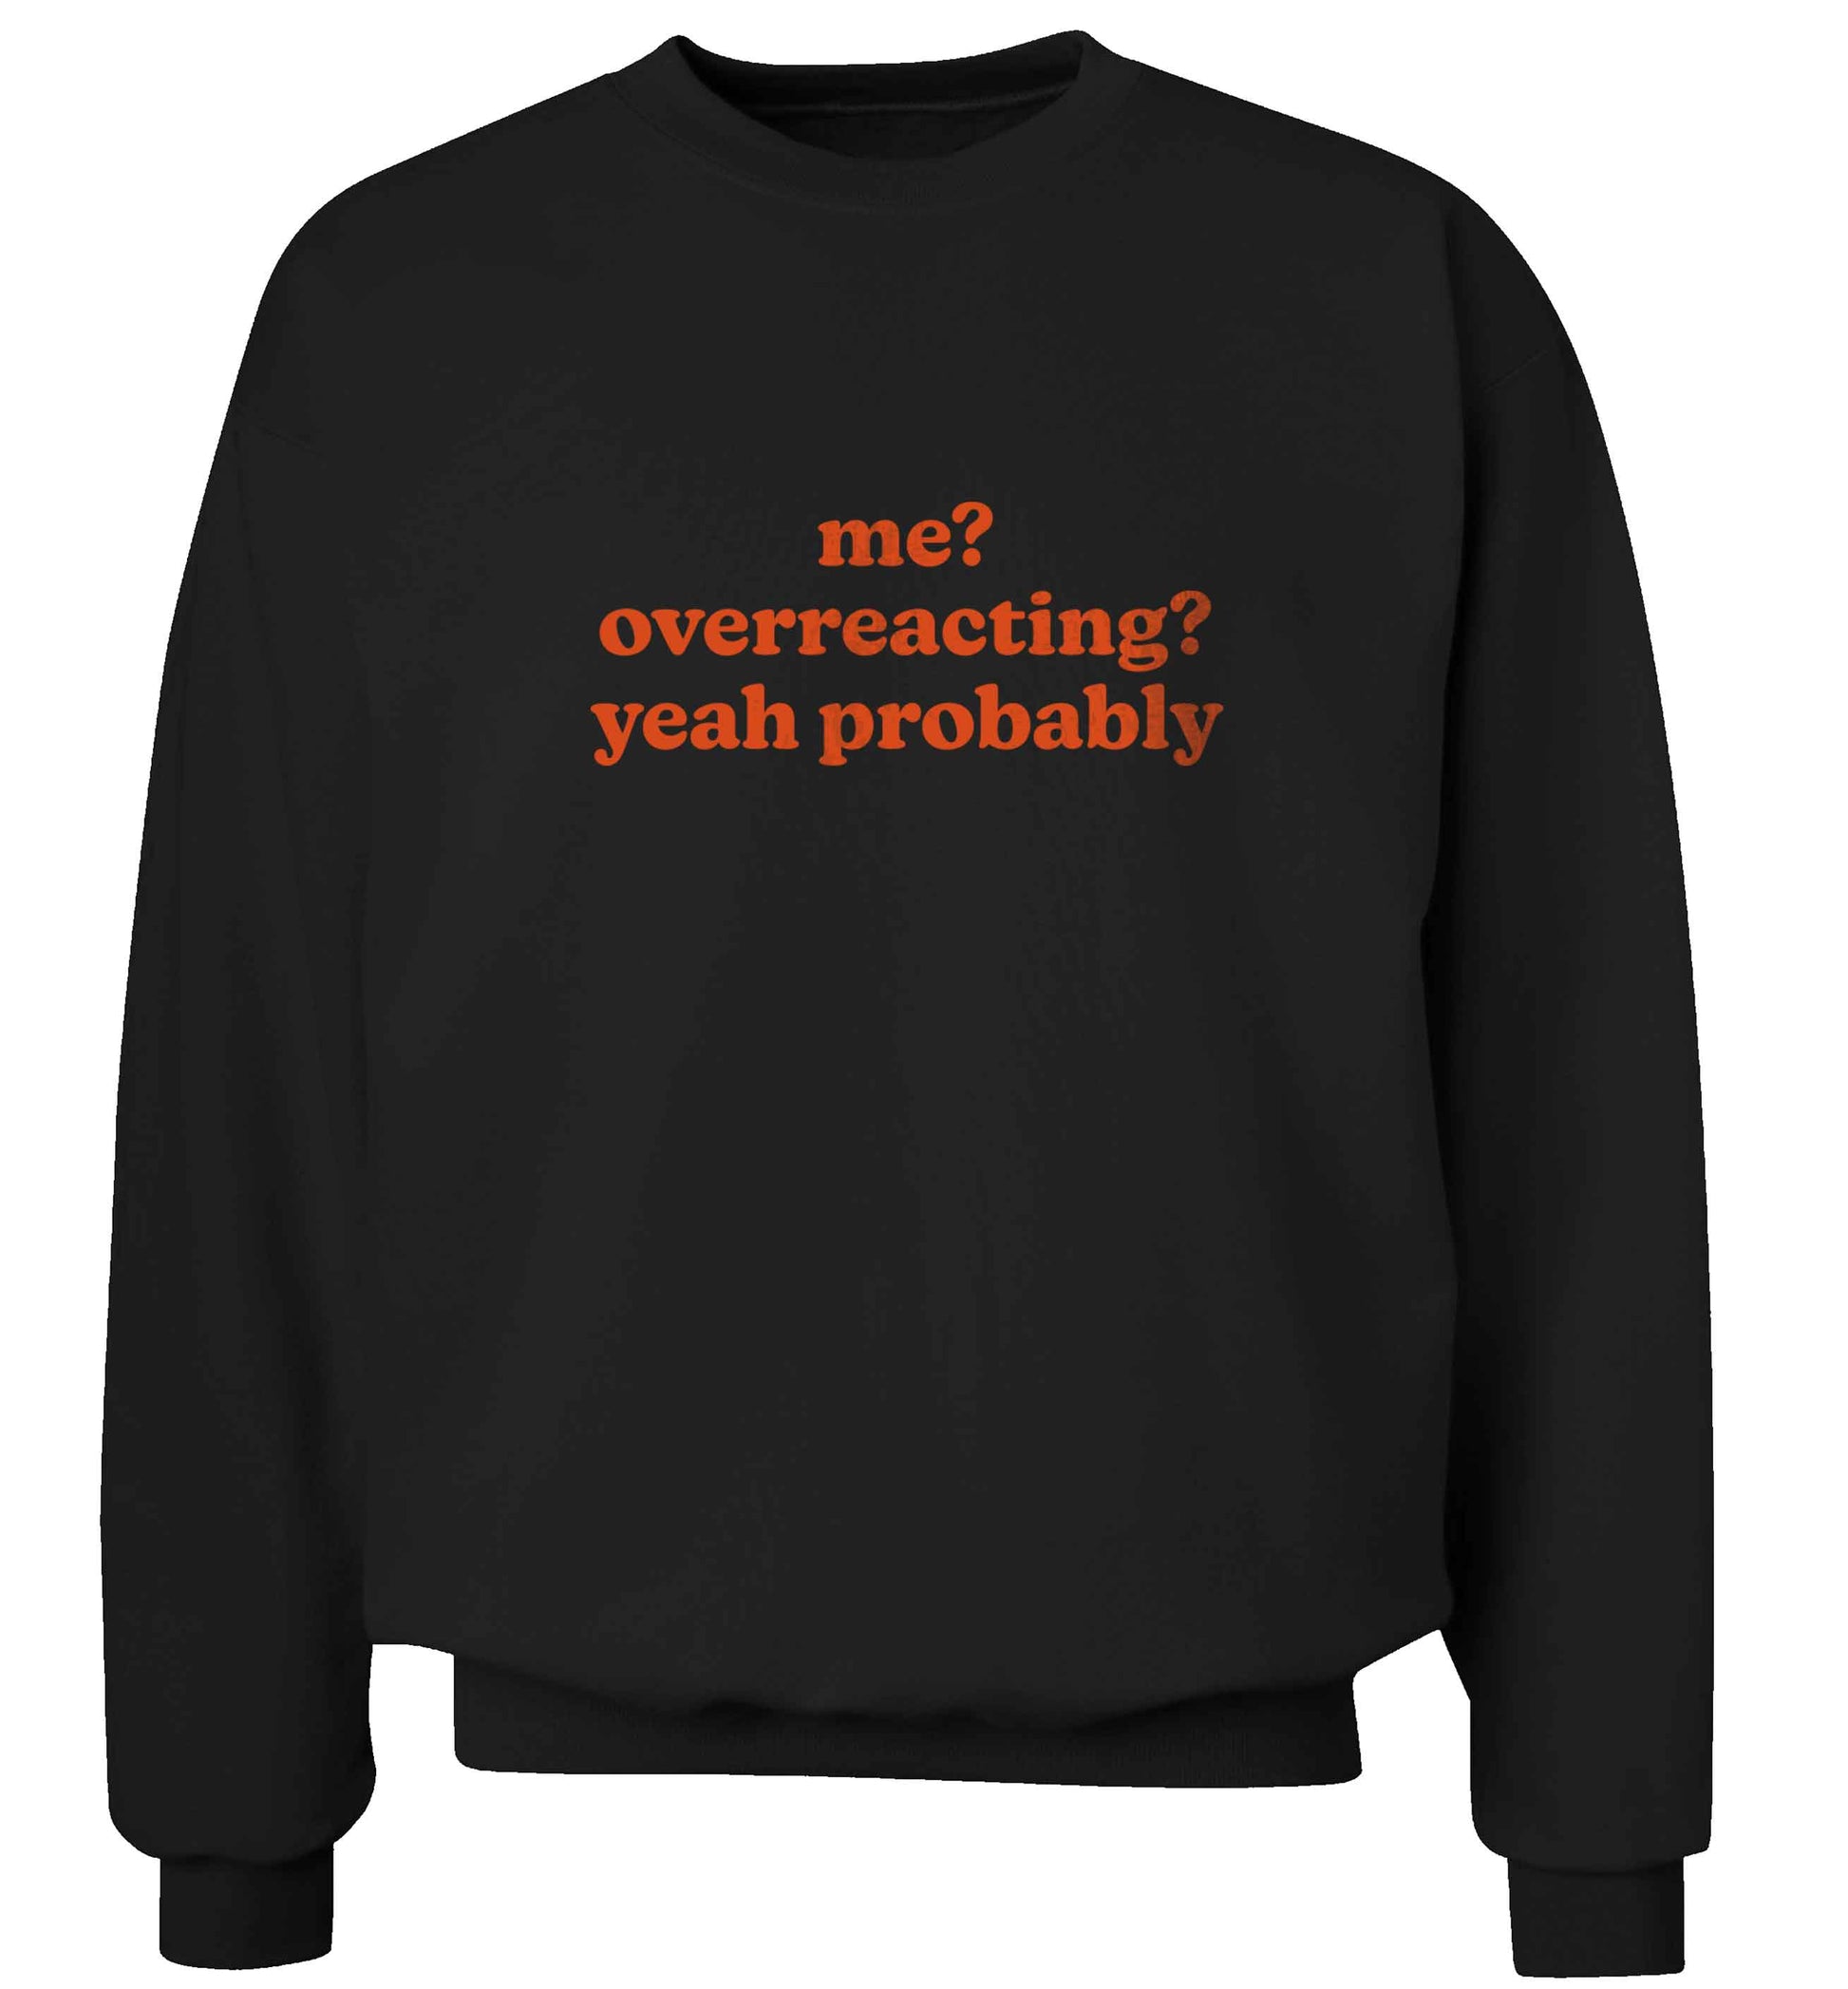 Me? Overreacting? Yeah probably adult's unisex black sweater 2XL